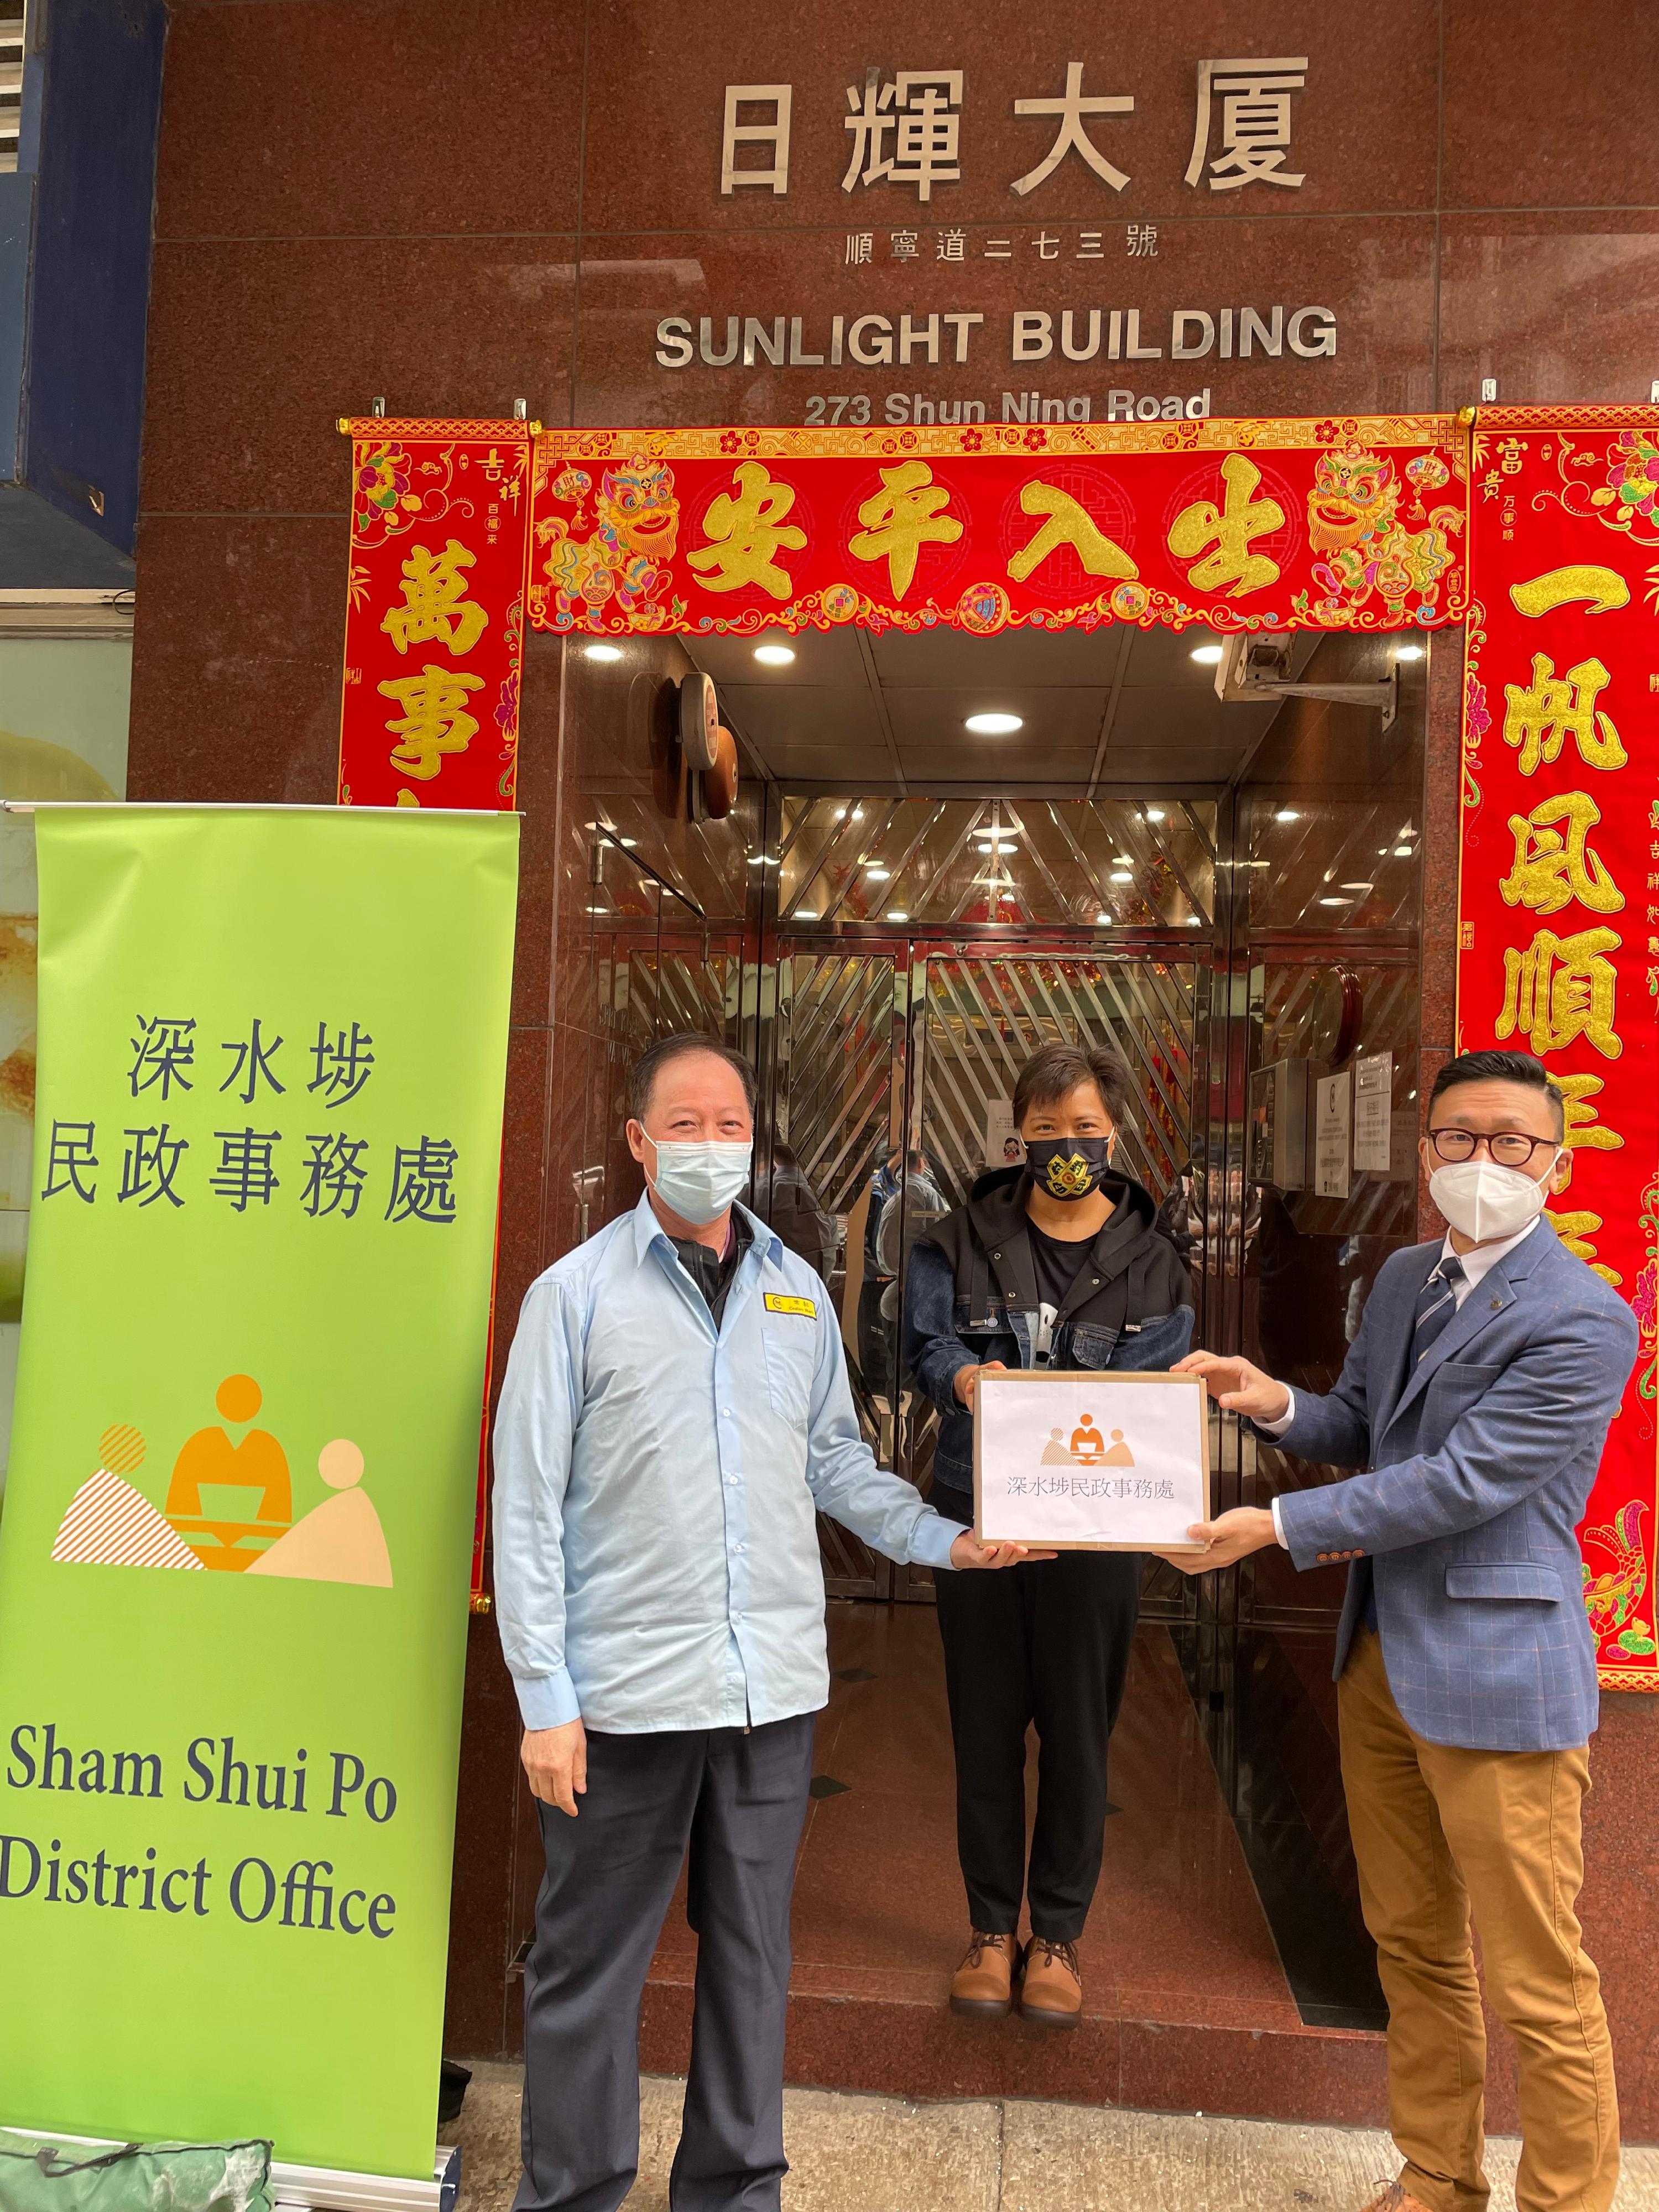 The Sham Shui Po District Office  today (February 10) distributed rapid test kits to cleansing workers and property management staff working in the residential premises located between Tonkin Street and Hing Wah Street in Sham Shui Po (Un Chau Street (even numbers), Castle Peak Road (odd and even numbers), Shun Ning Road (odd and even numbers), Po On Road (odd numbers)) (including Peaceful Mansion and The Addition) for voluntary testing through owners' corporations or the property management companies of the buildings.